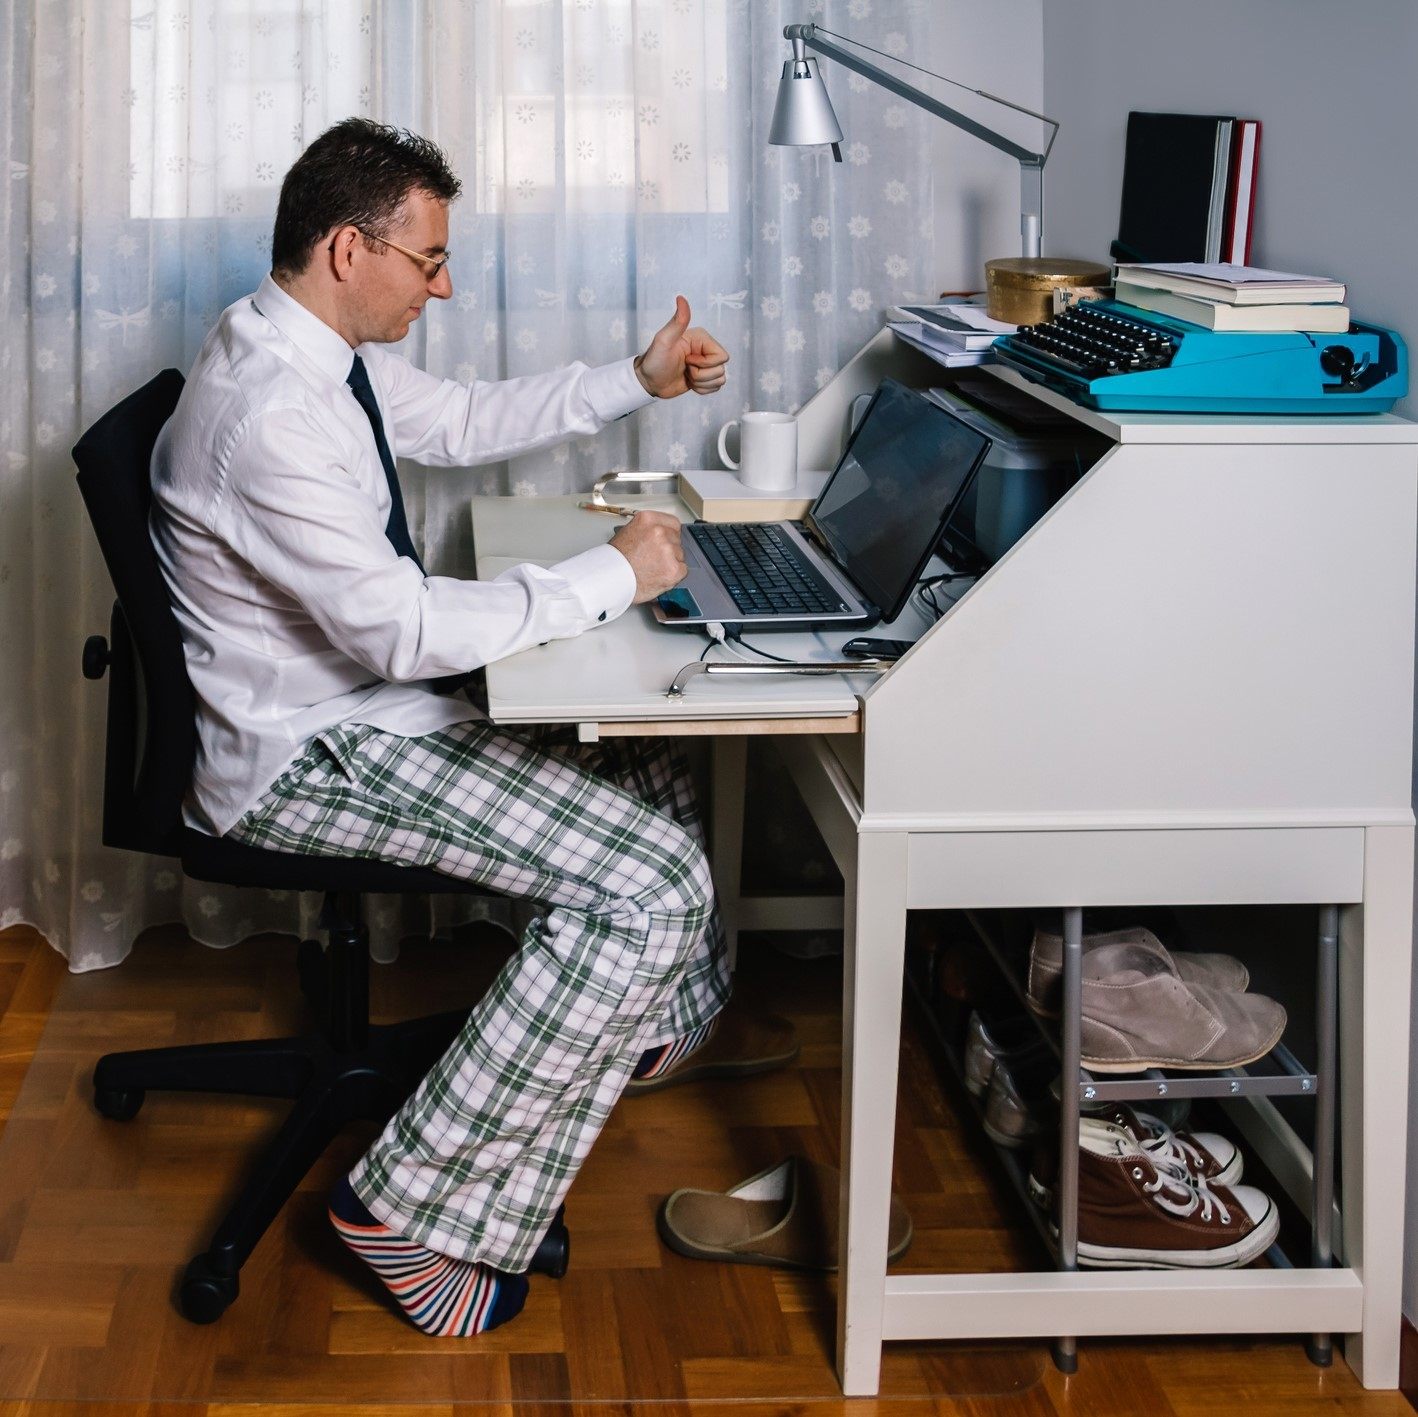 Business on Top, Sweatpants on Bottom Workplace Fashion in the Age of